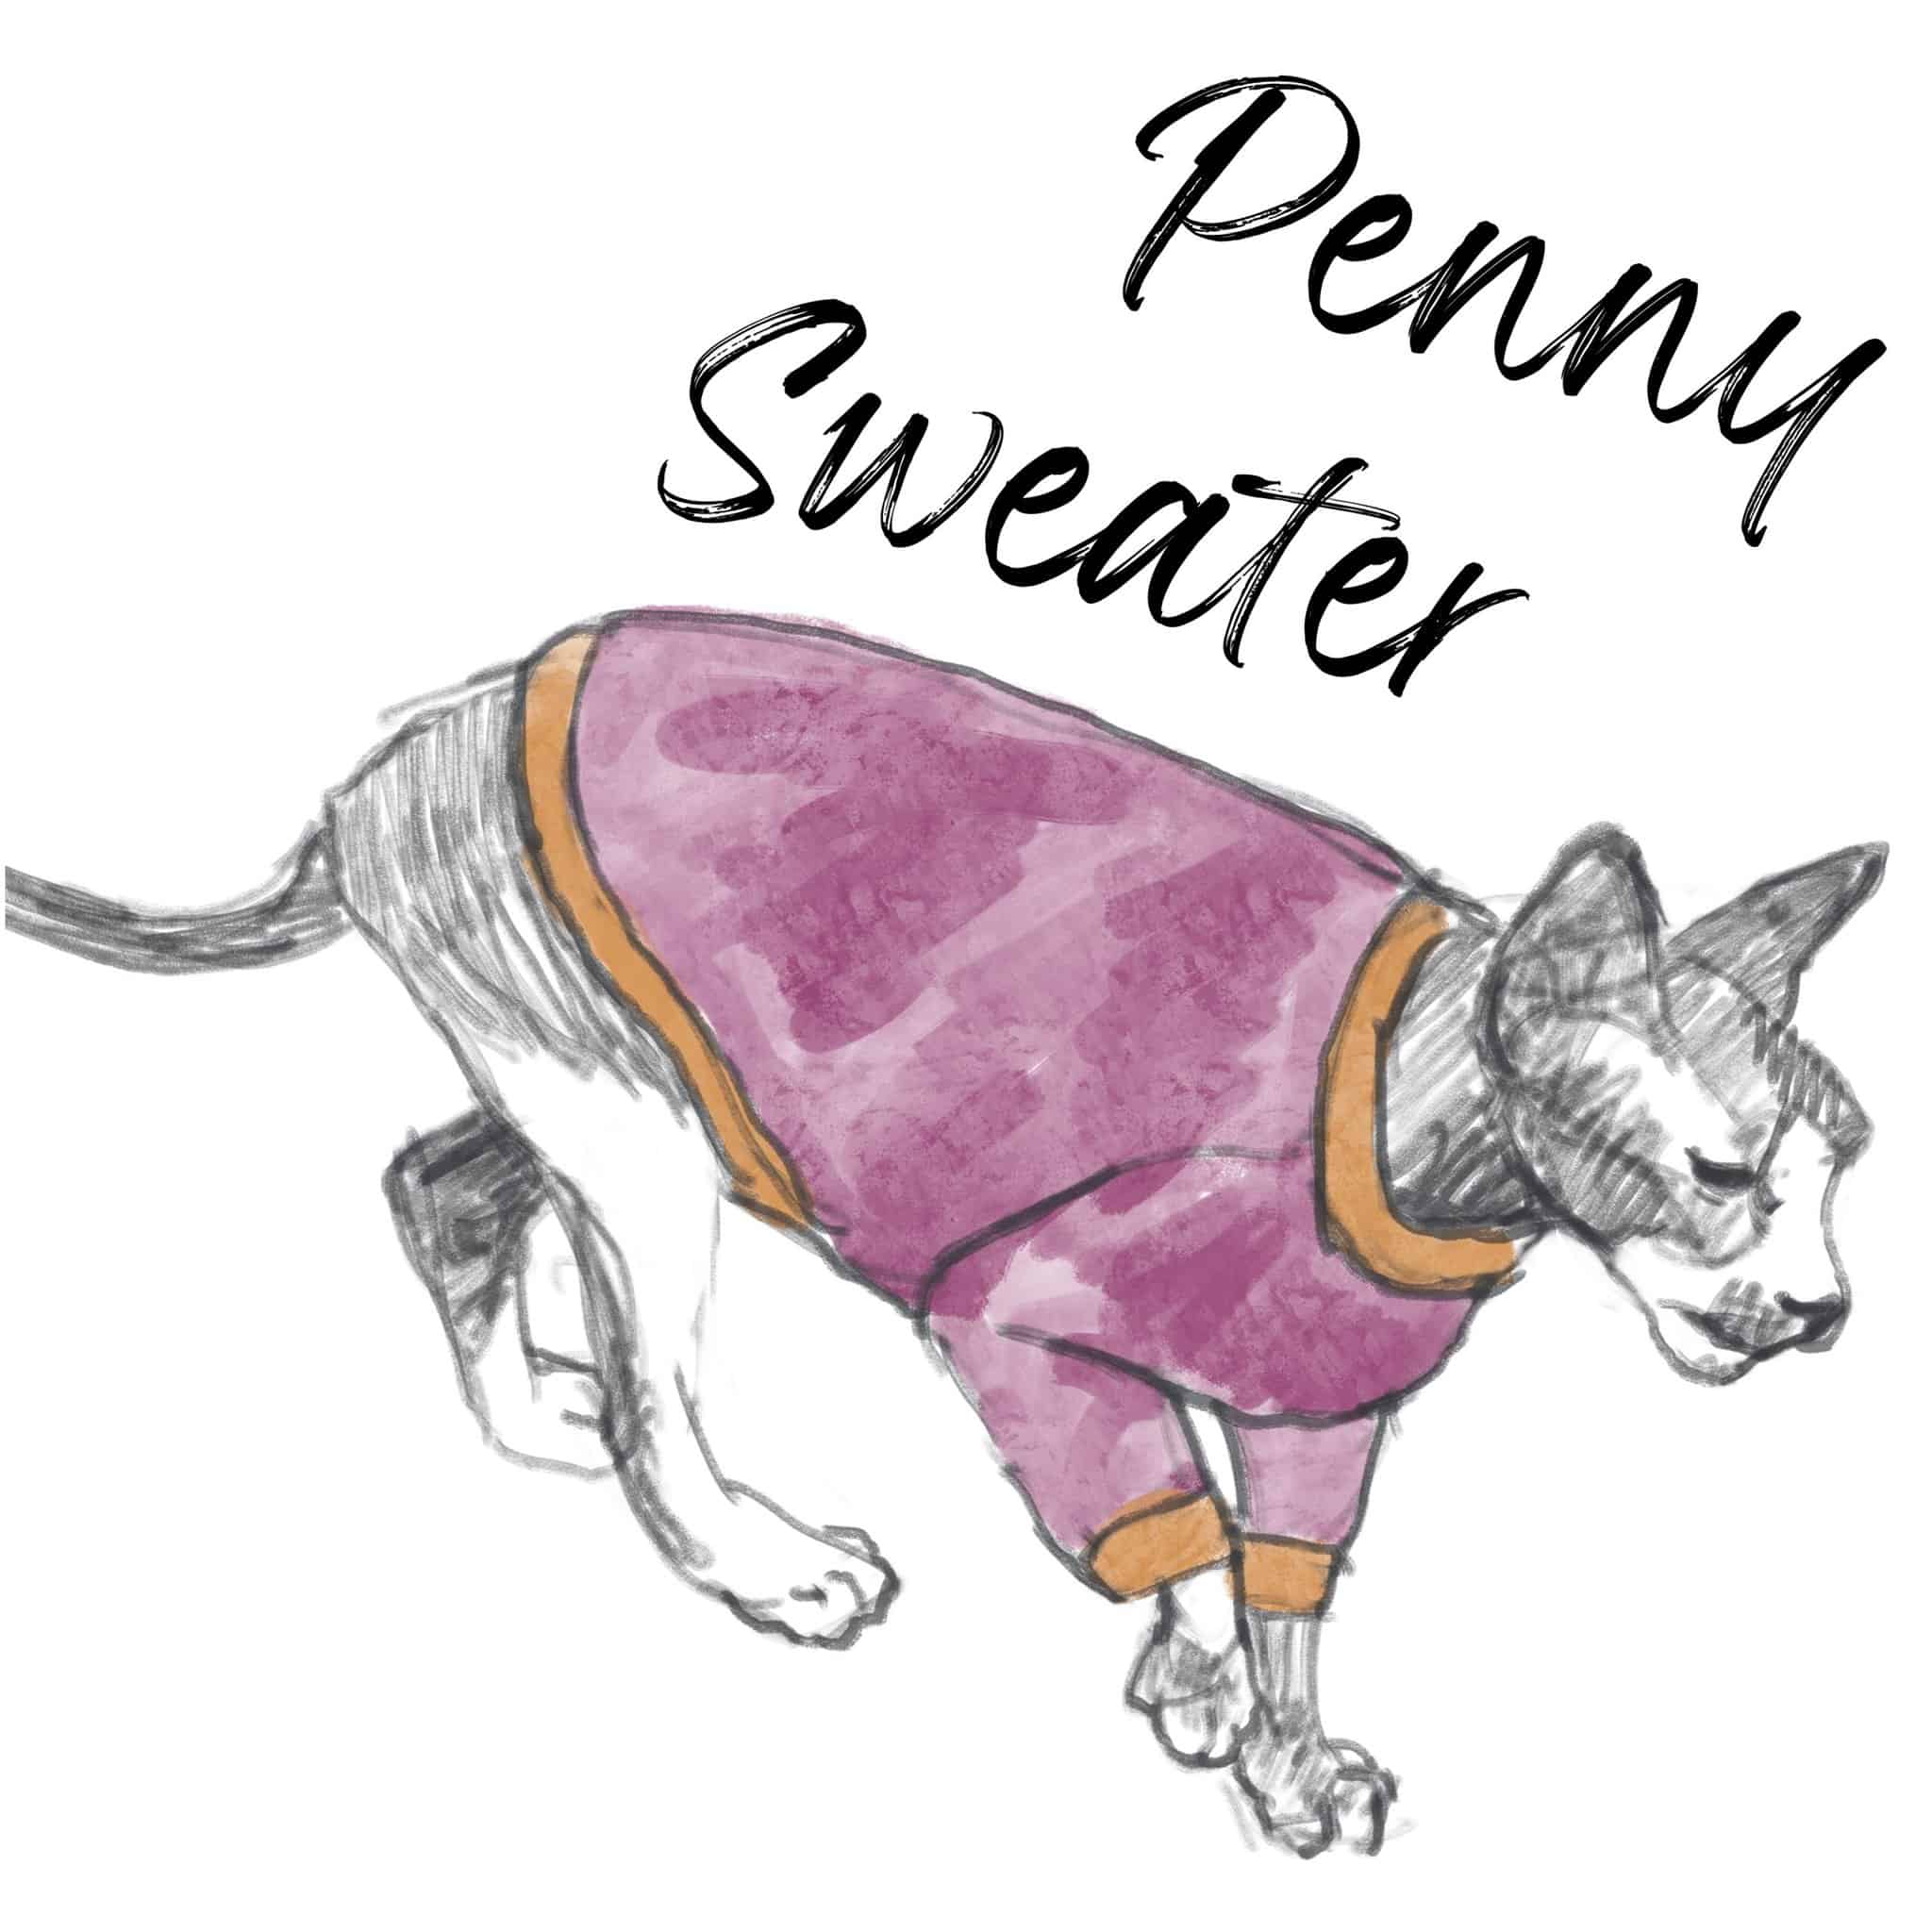 50 Sizes Sphinx Cat Sweater Sewing Pattern Penny Sweater for Cats - The Tailoress PDF Sewing Patterns